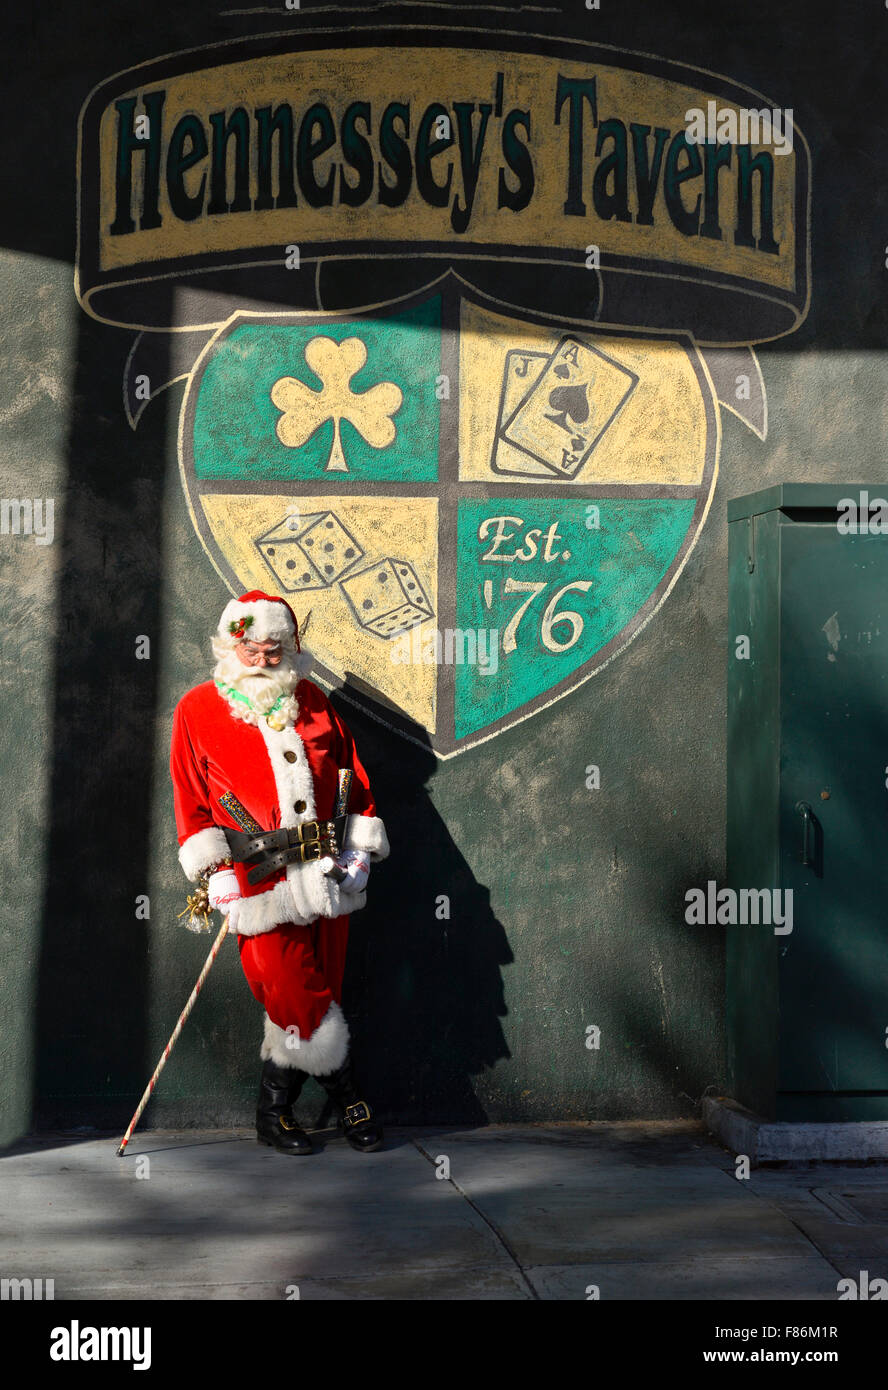 Las Vegas, US. 05th Dec, 2015. A man dressed in an authentic Santa Claus outfit poses for picture at the Great Santa Run in front of the Hennessey's Tavern Sign in the Fremont District, Las Vega Credit: © Ken Howard/Alamy Live News  Stock Photo